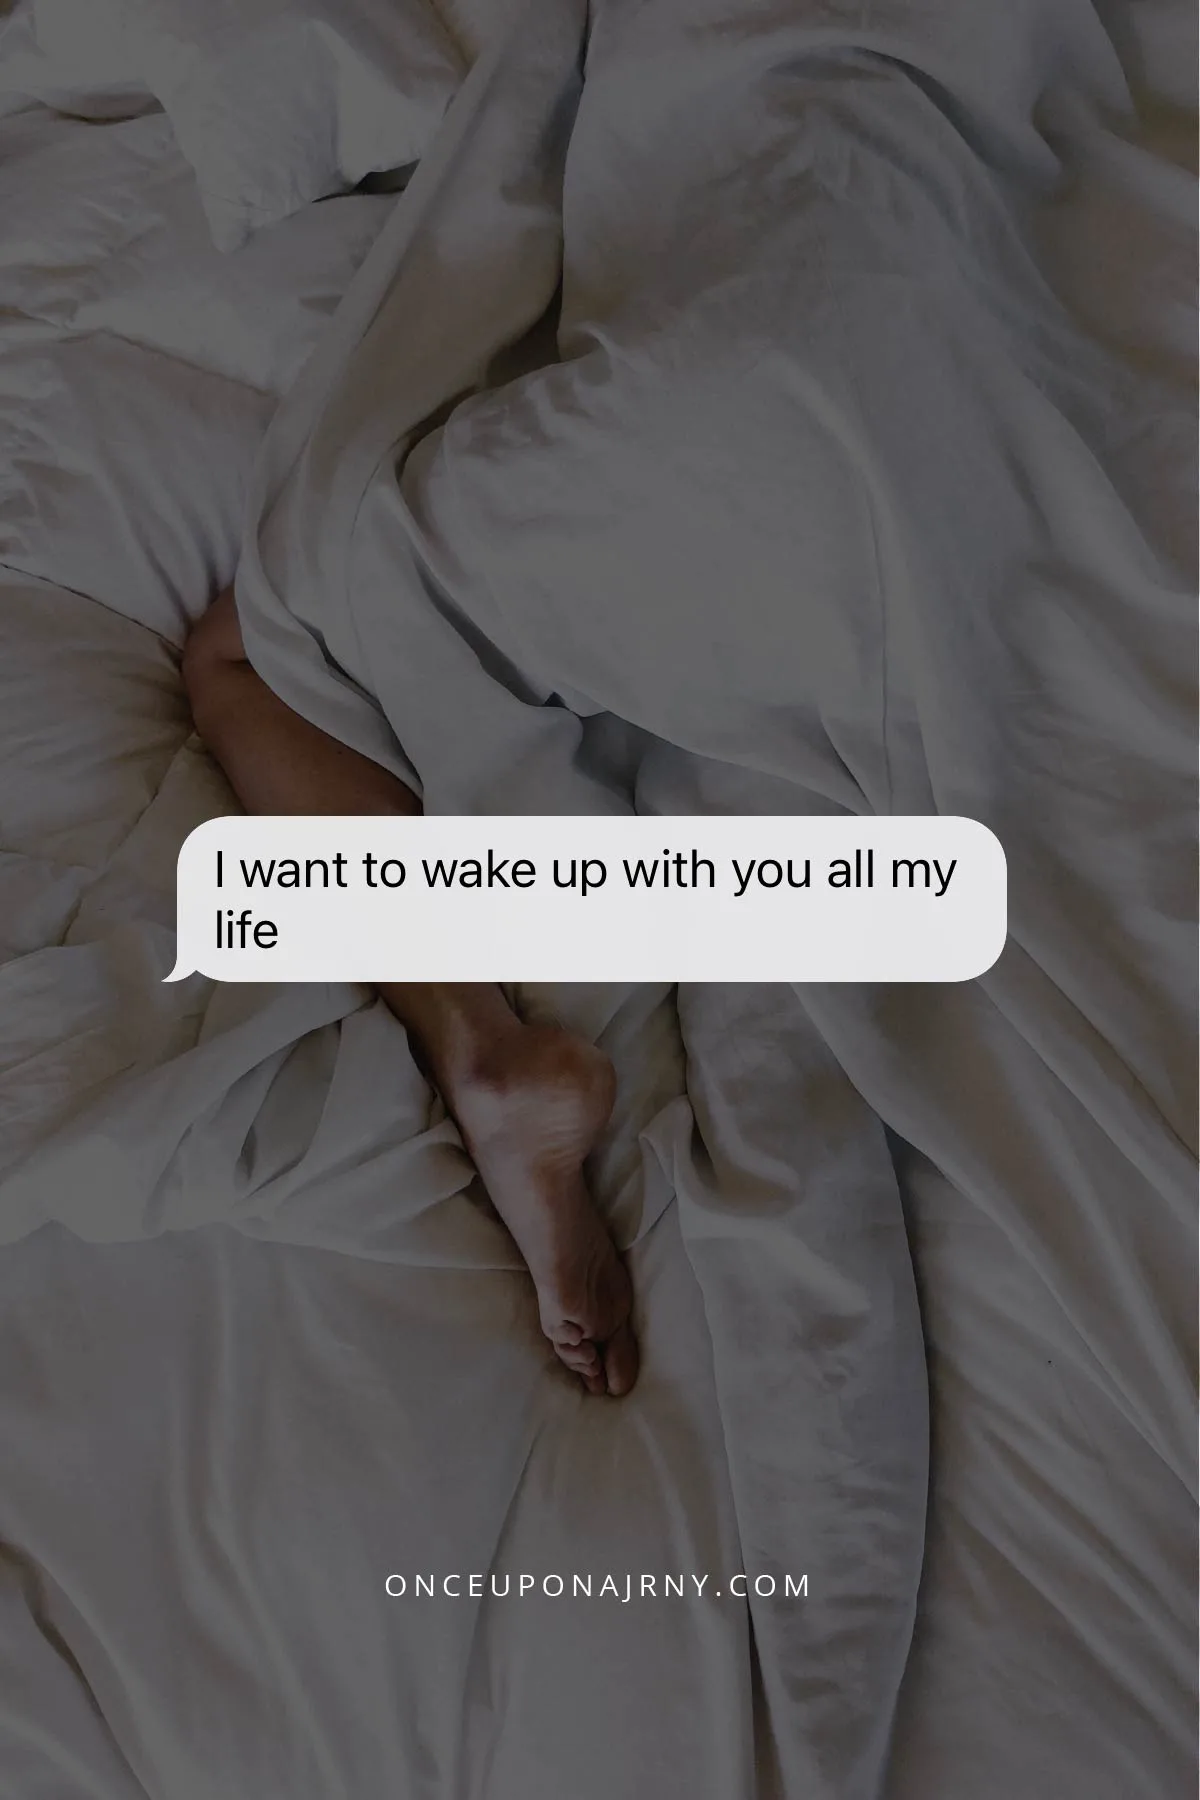 I want to wake up with you all my life lesbian relationship quotes